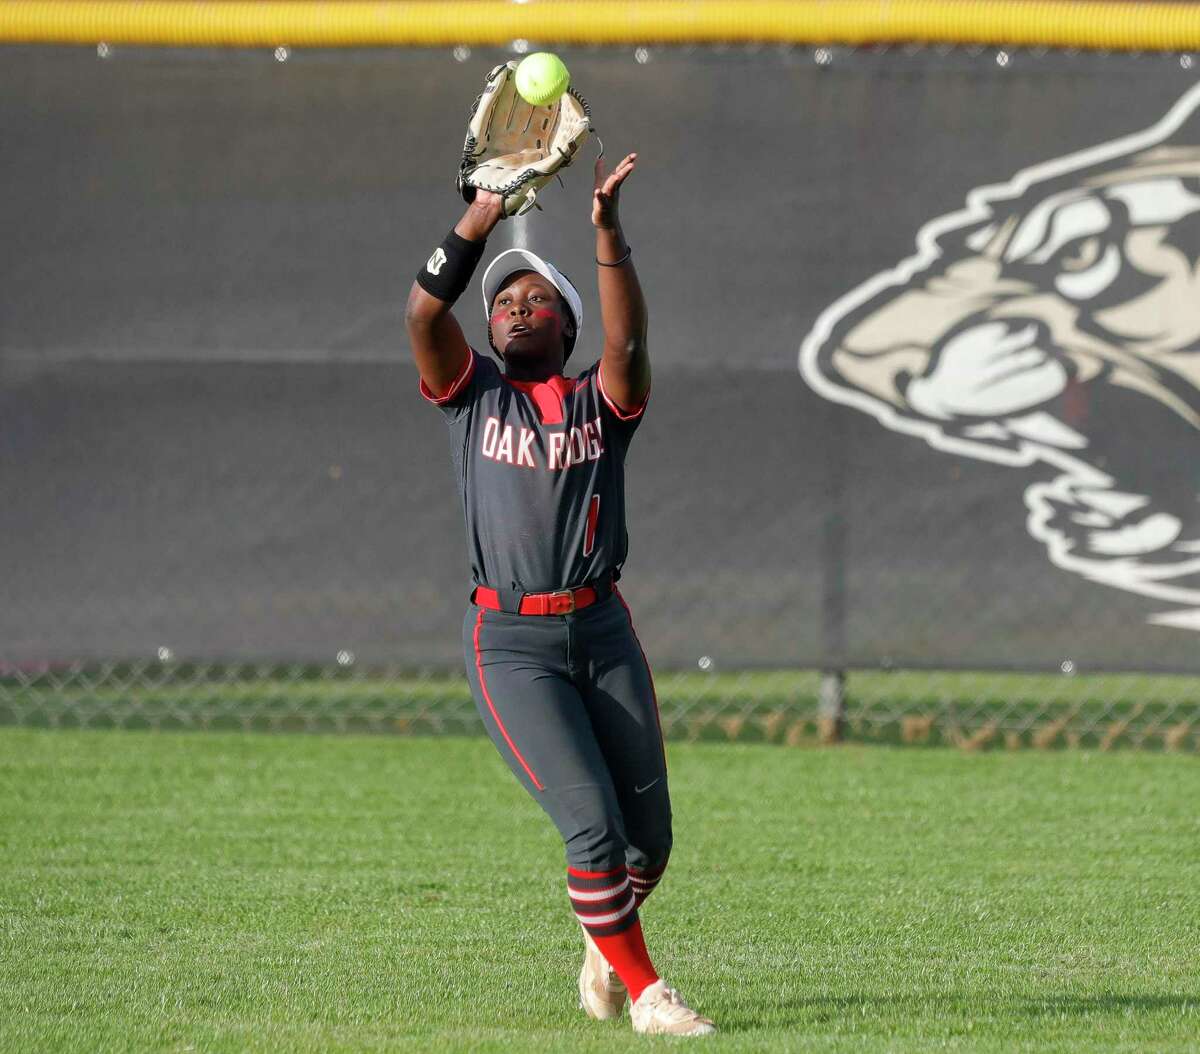 Oak Ridge center fielder Ariel Redmond (1) catches a fly ball in the third inning during a District 13-6A high school softball game at Conroe High School, Wednesday, March 23, 2022, in Conroe.